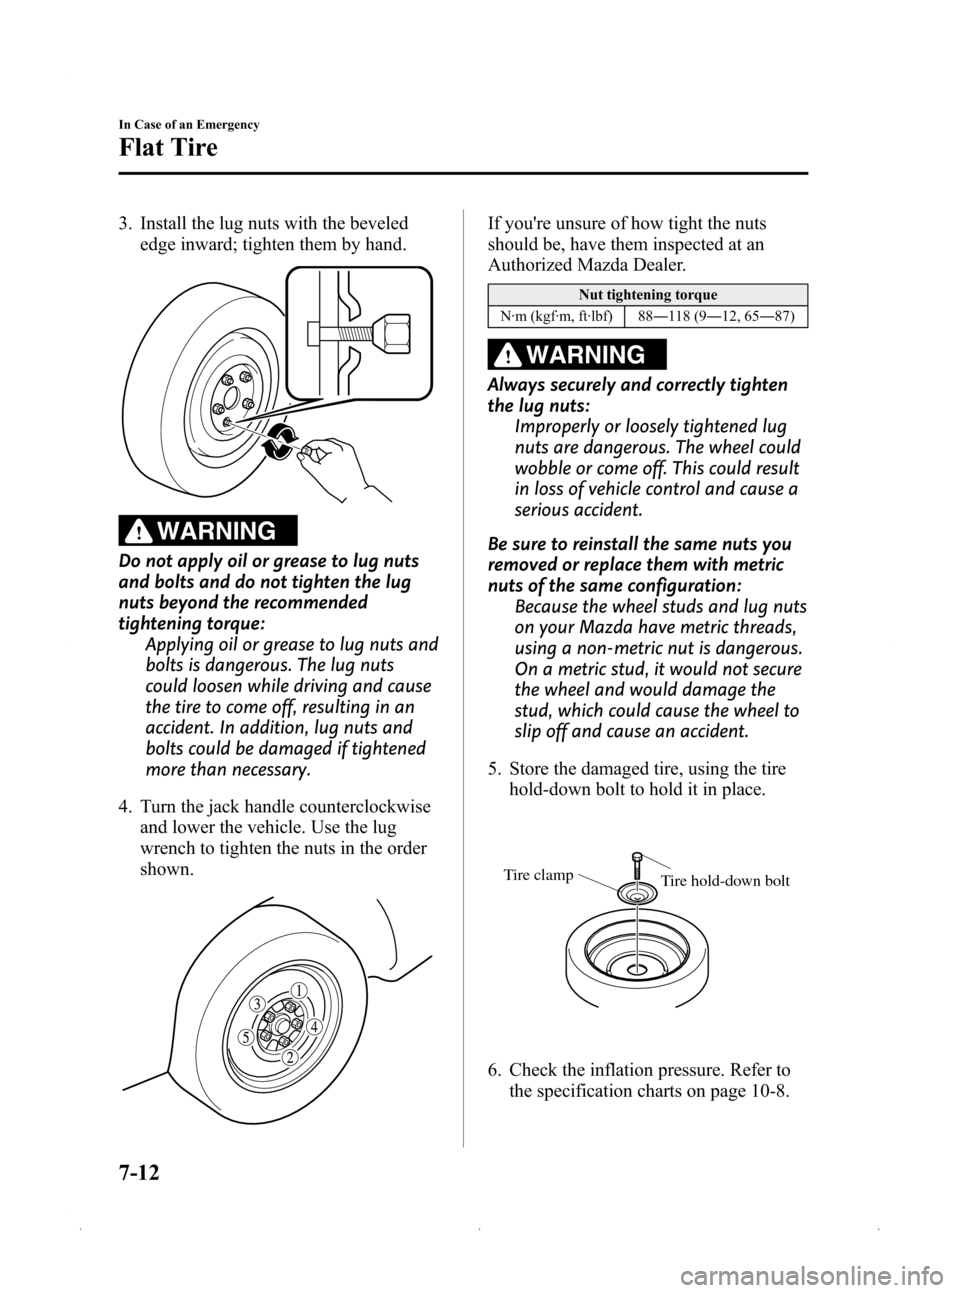 MAZDA MODEL 3 HATCHBACK 2009  Owners Manual (in English) Black plate (274,1)
3. Install the lug nuts with the bevelededge inward; tighten them by hand.
WARNING
Do not apply oil or grease to lug nuts
and bolts and do not tighten the lug
nuts beyond the recom